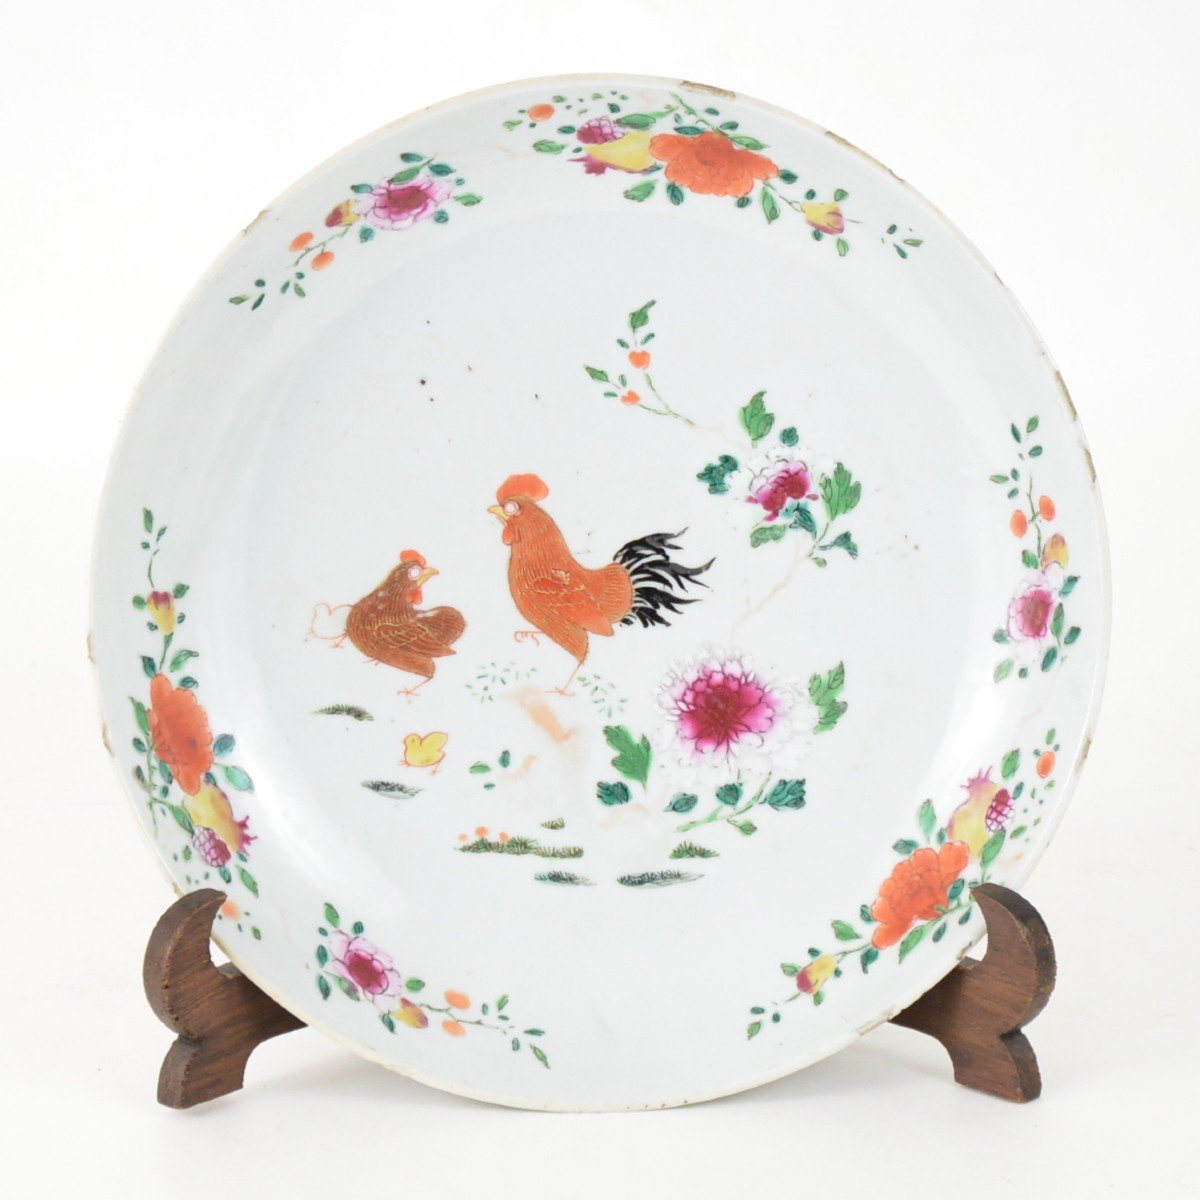 Chinese Porcelain Famille Rose Plate Guilded With Roosters, Qing Dynasty 18th Century